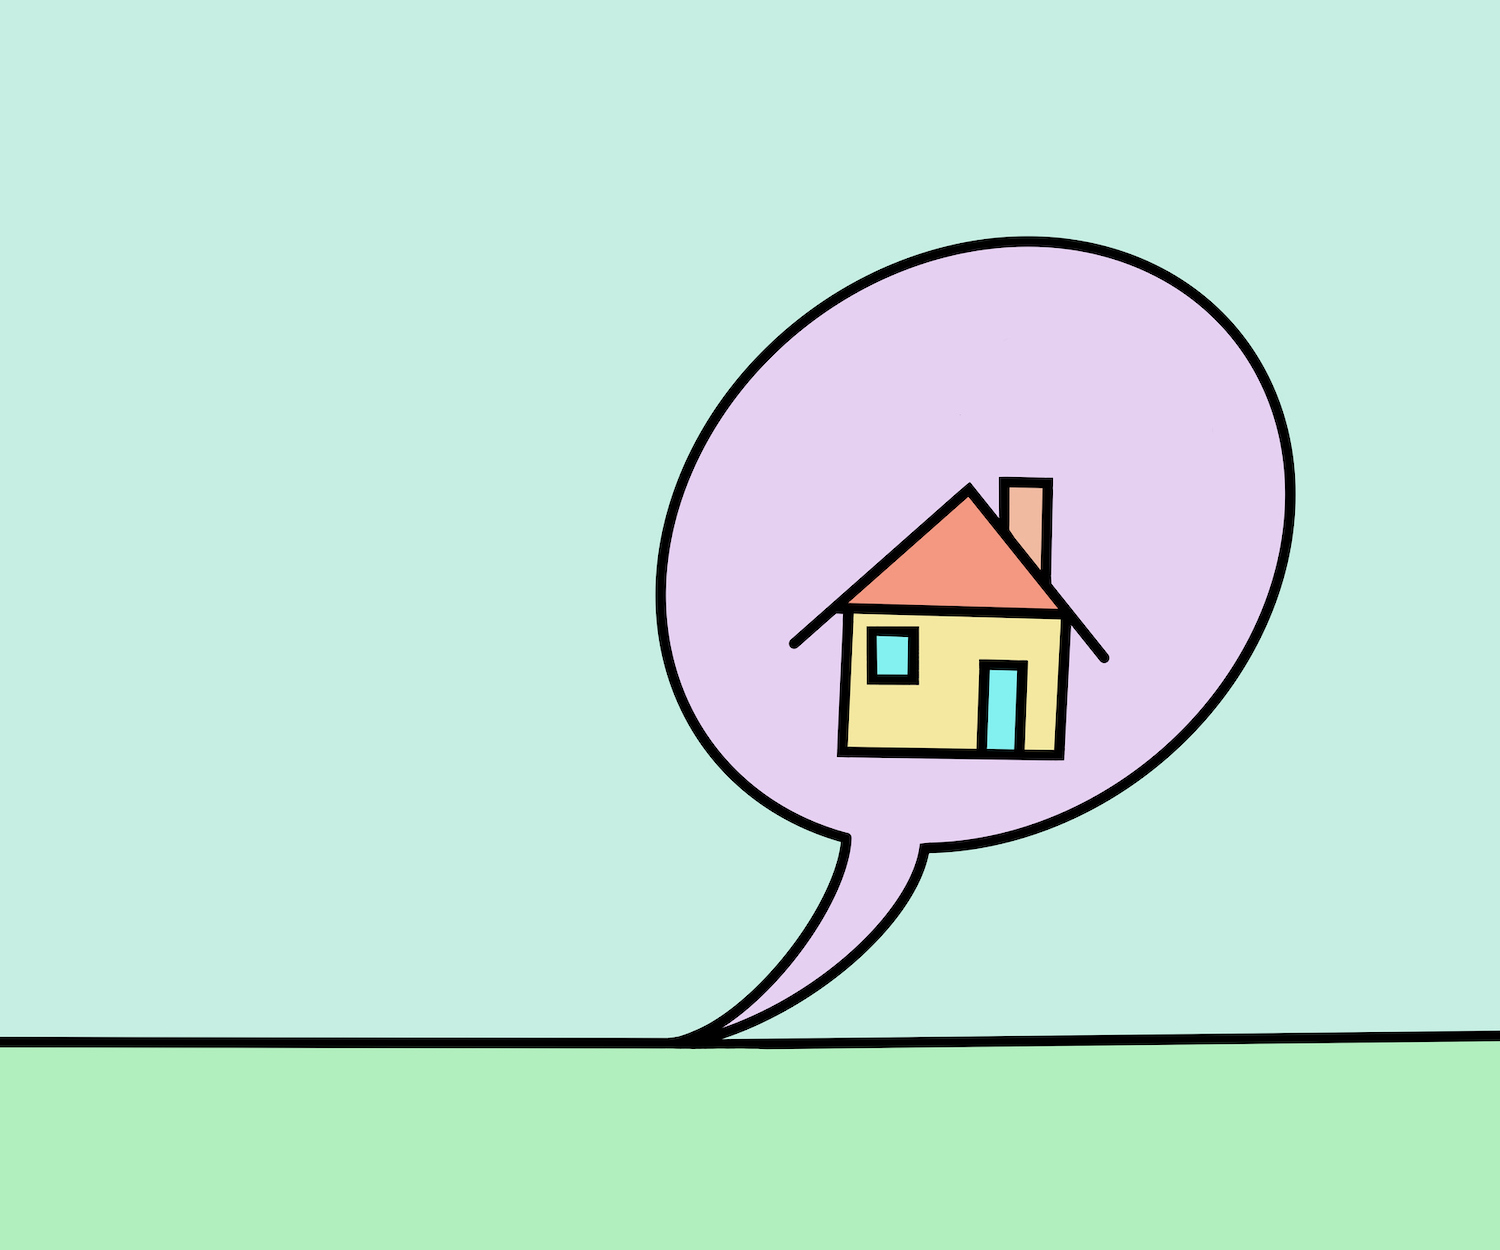 Speech bubble with home